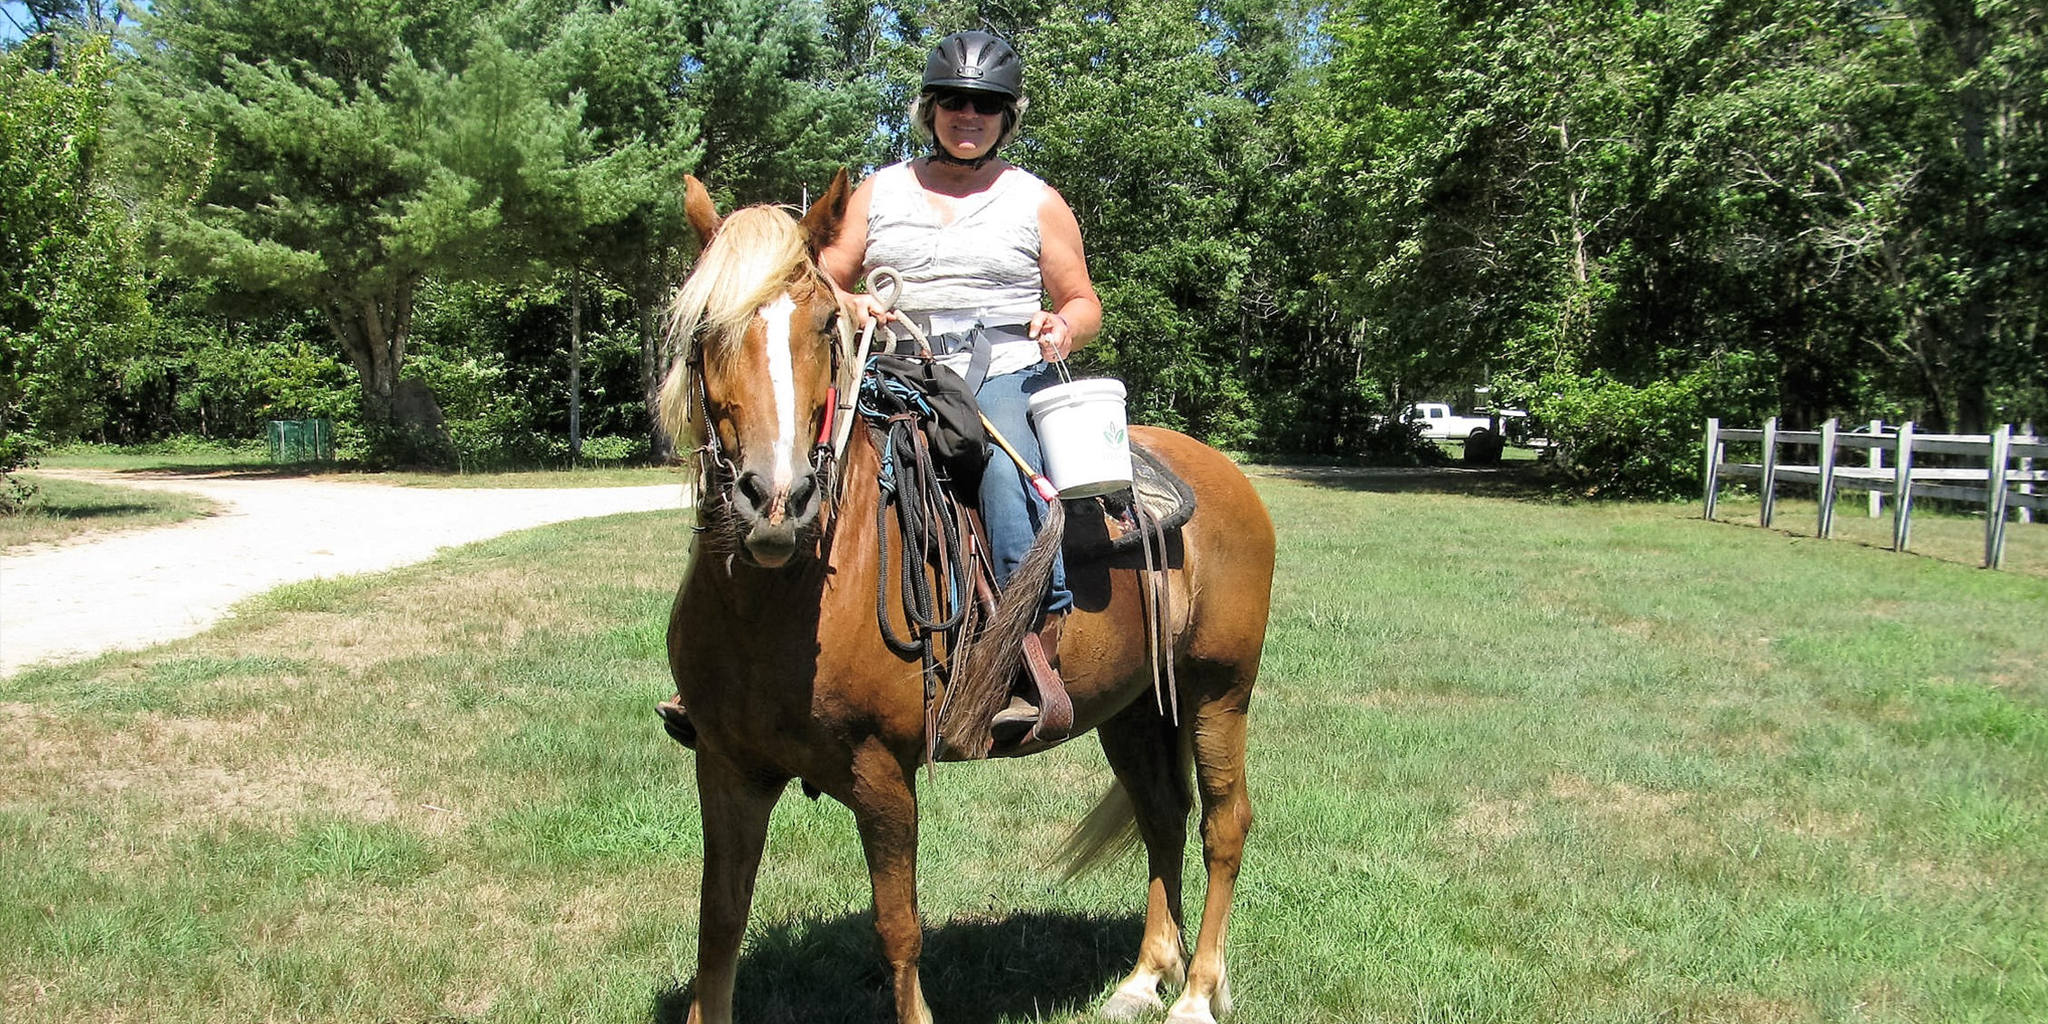 Rhode Island Federation of Riding Clubs Celebrates 50th Anniversary